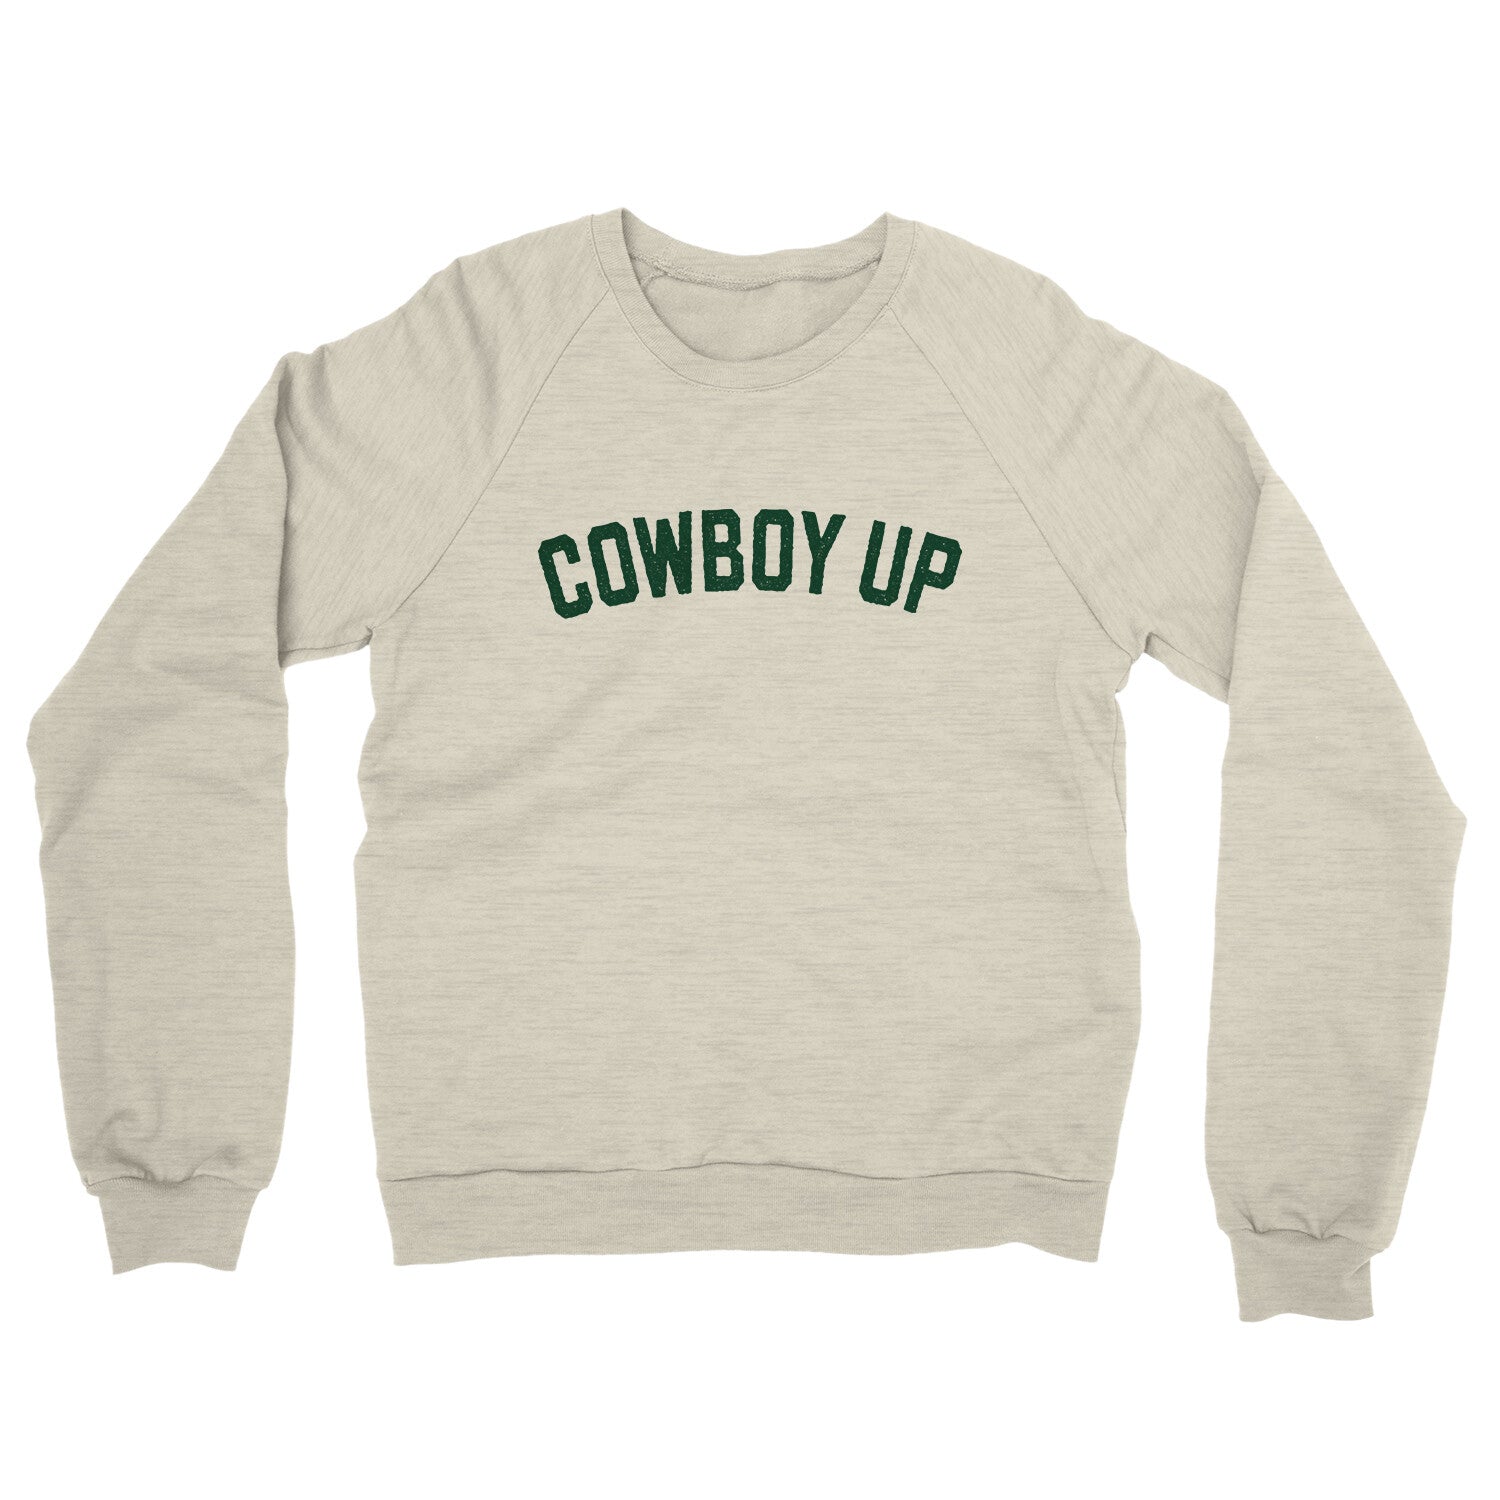 Cowboy Up in Heather Oatmeal Color